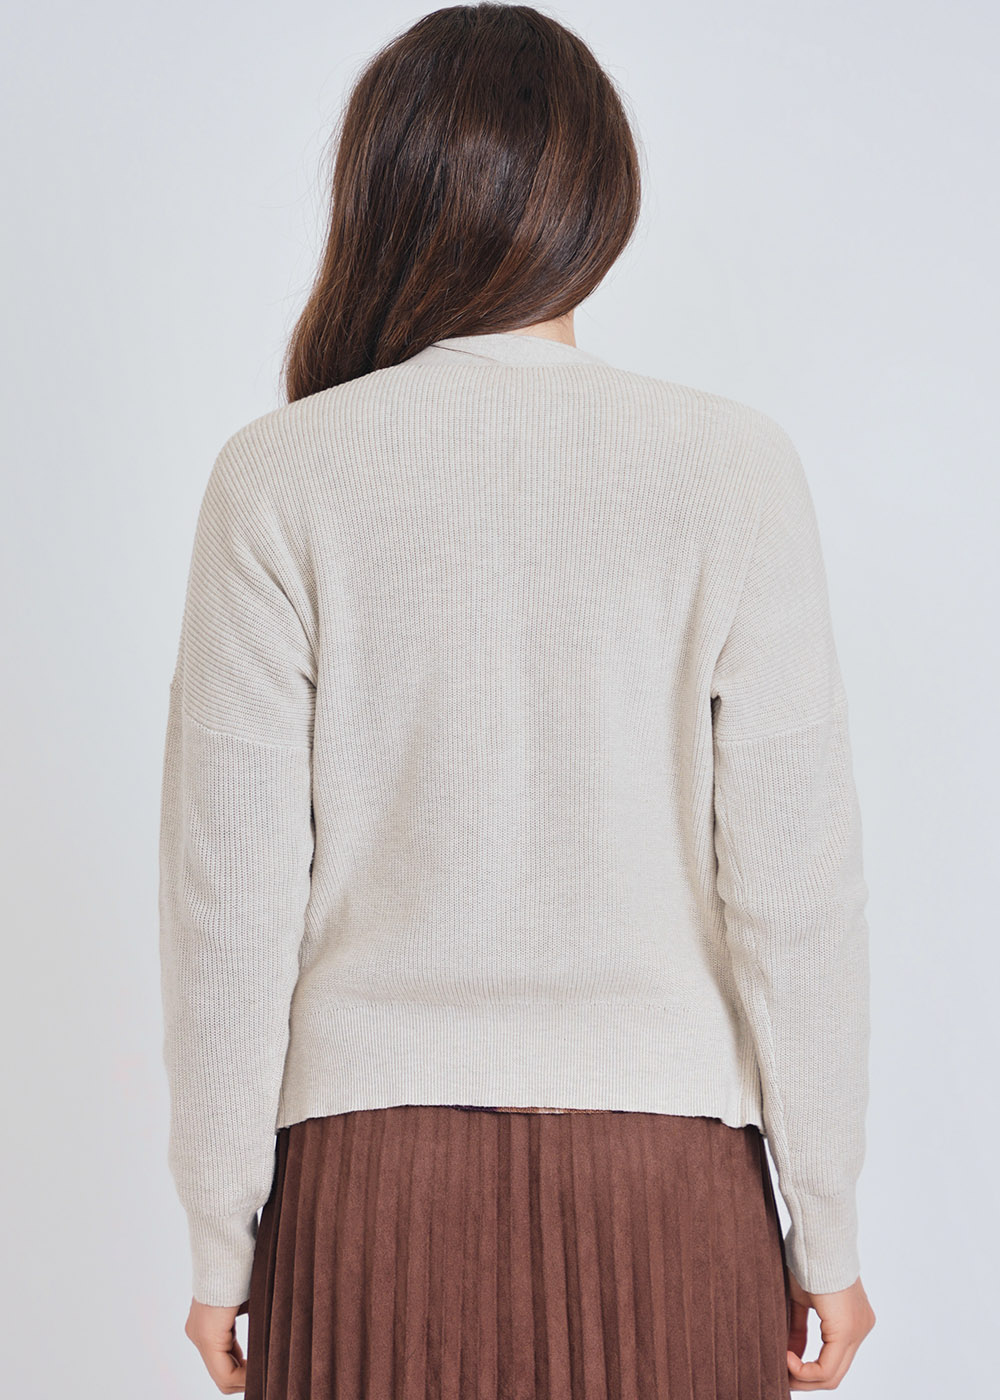 Soft Sand Cardigan: Ribbed Detail, Button Closure, and Pockets